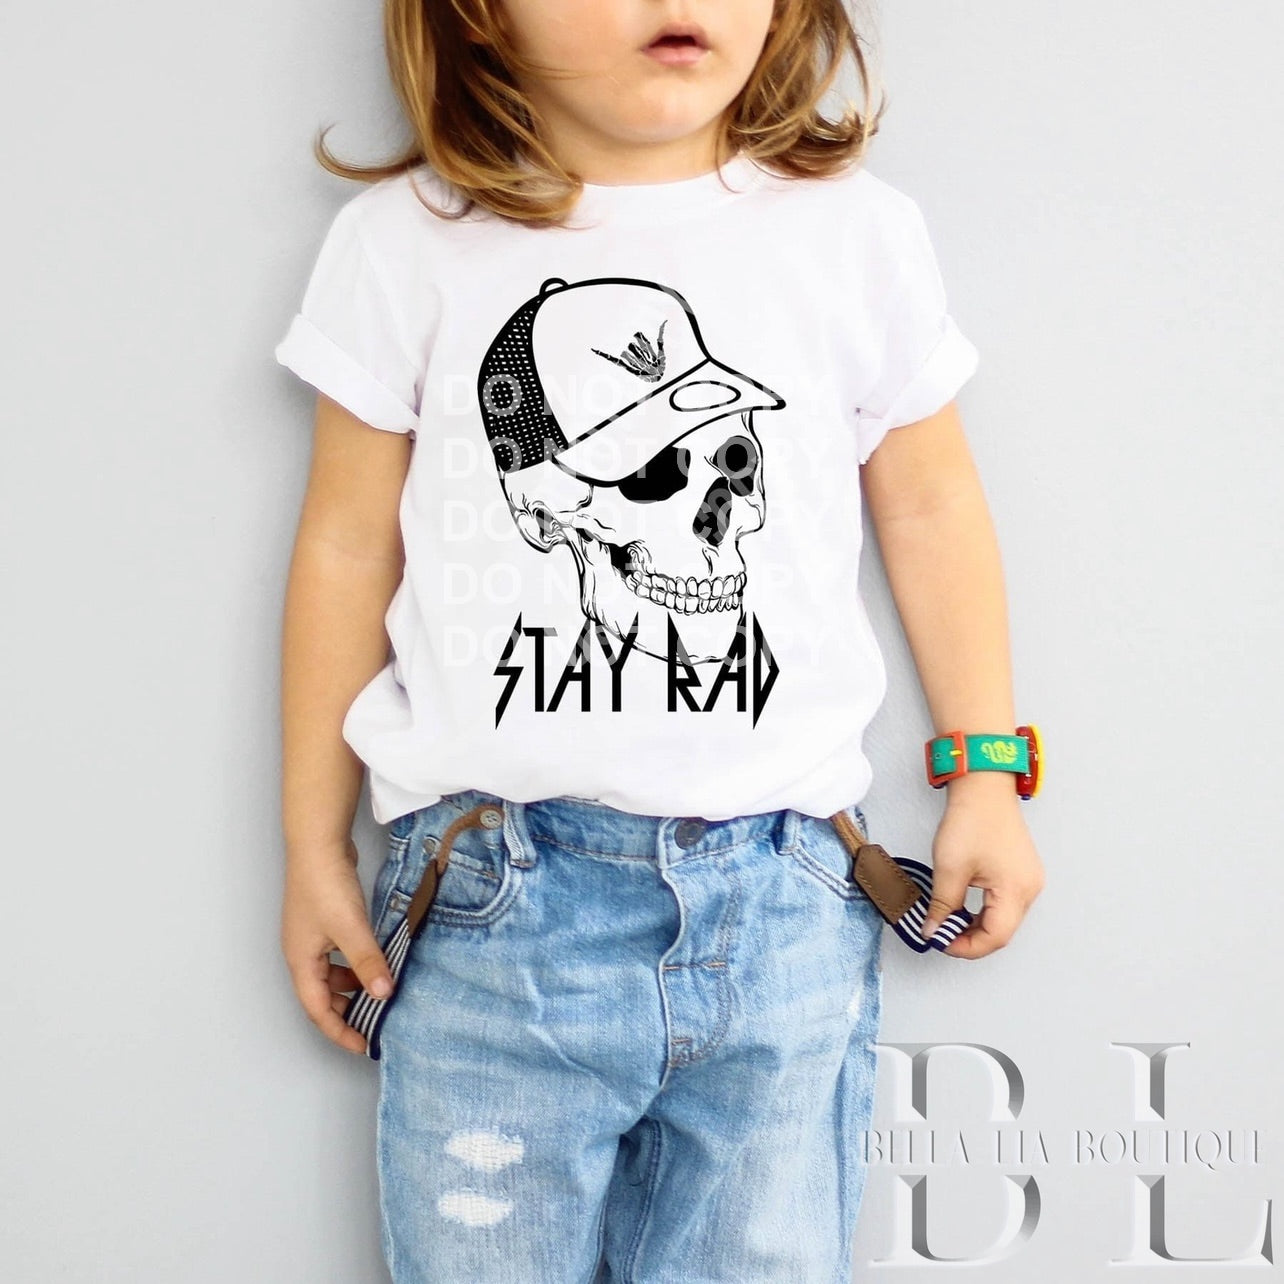 Stay Rad Toddler and Youth Tee - Bella Lia Boutique